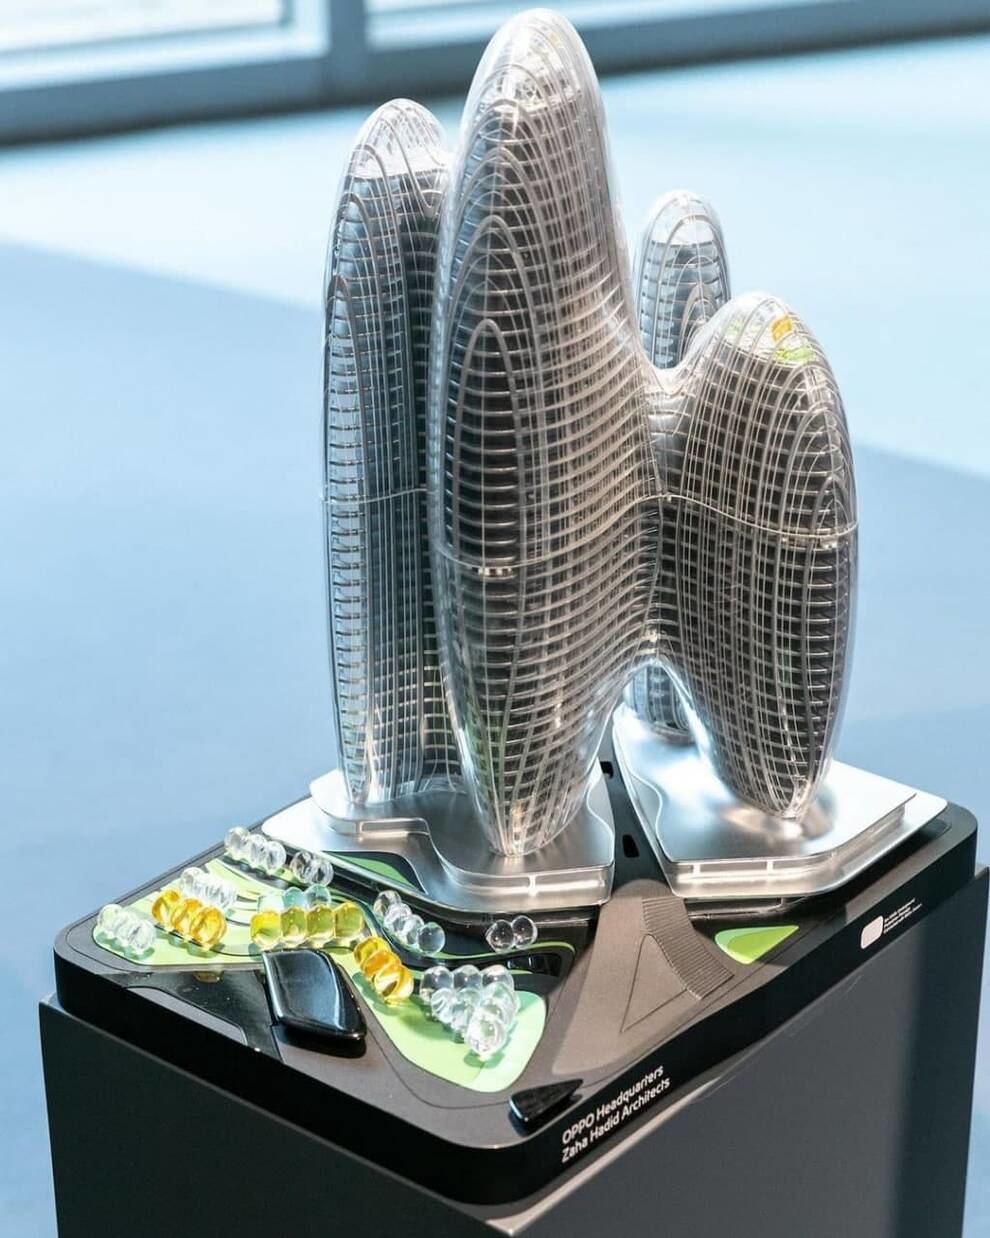 Vertical Urbanism: Zaha Hadid Architects Exhibition Opens in Hong Kong